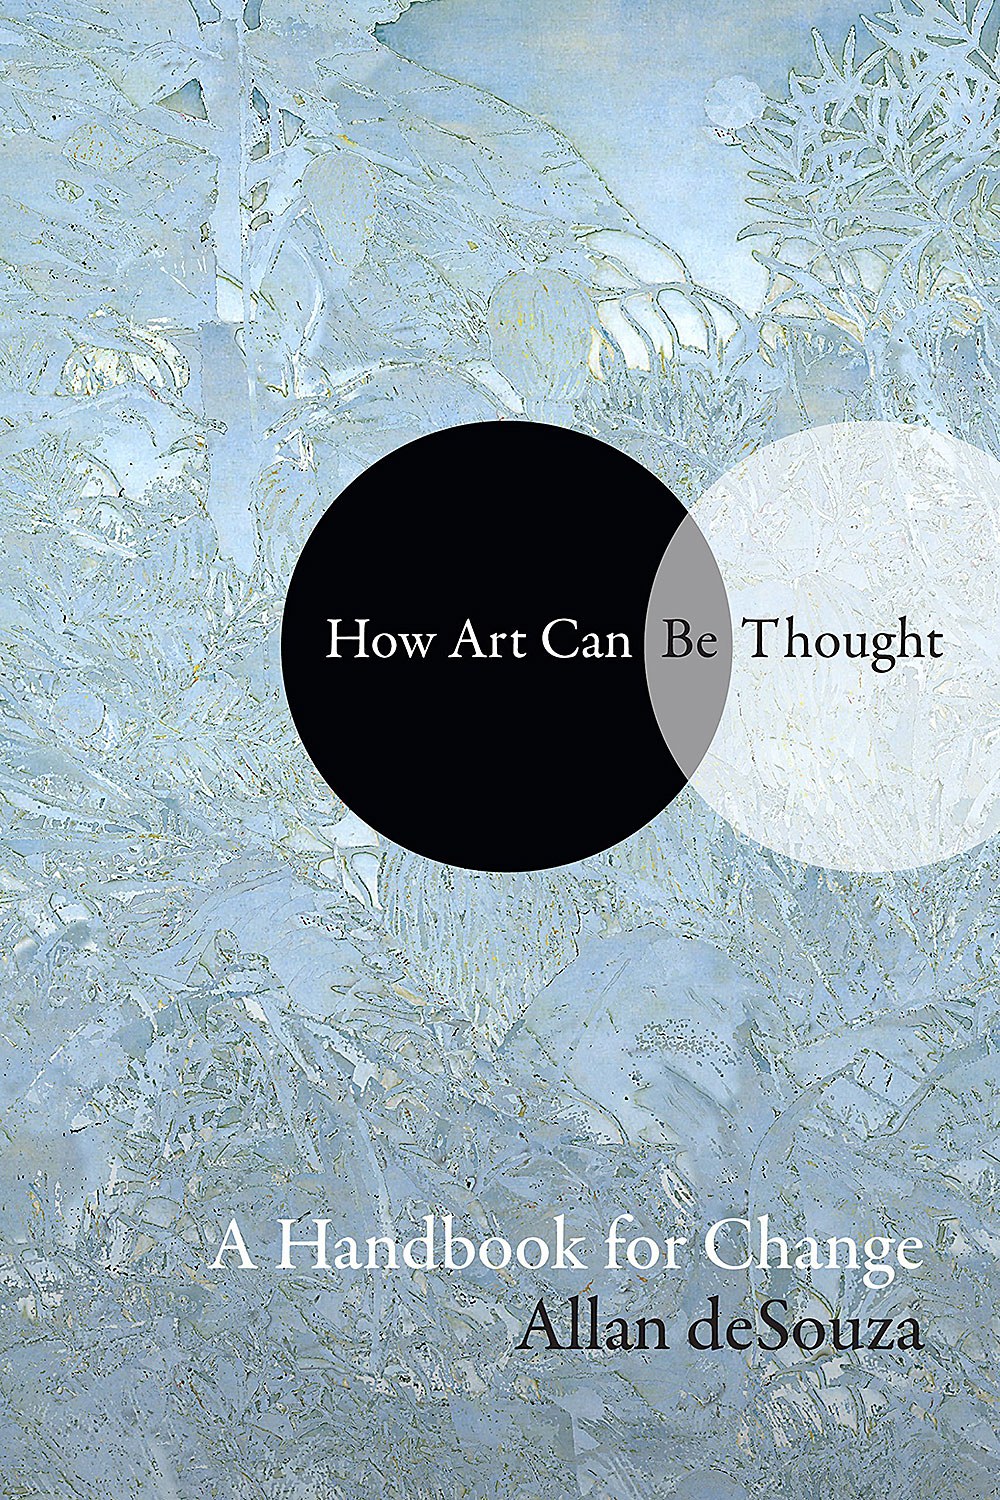 How Art Can Be Thought: A Handbook for Change by Allan deSouza